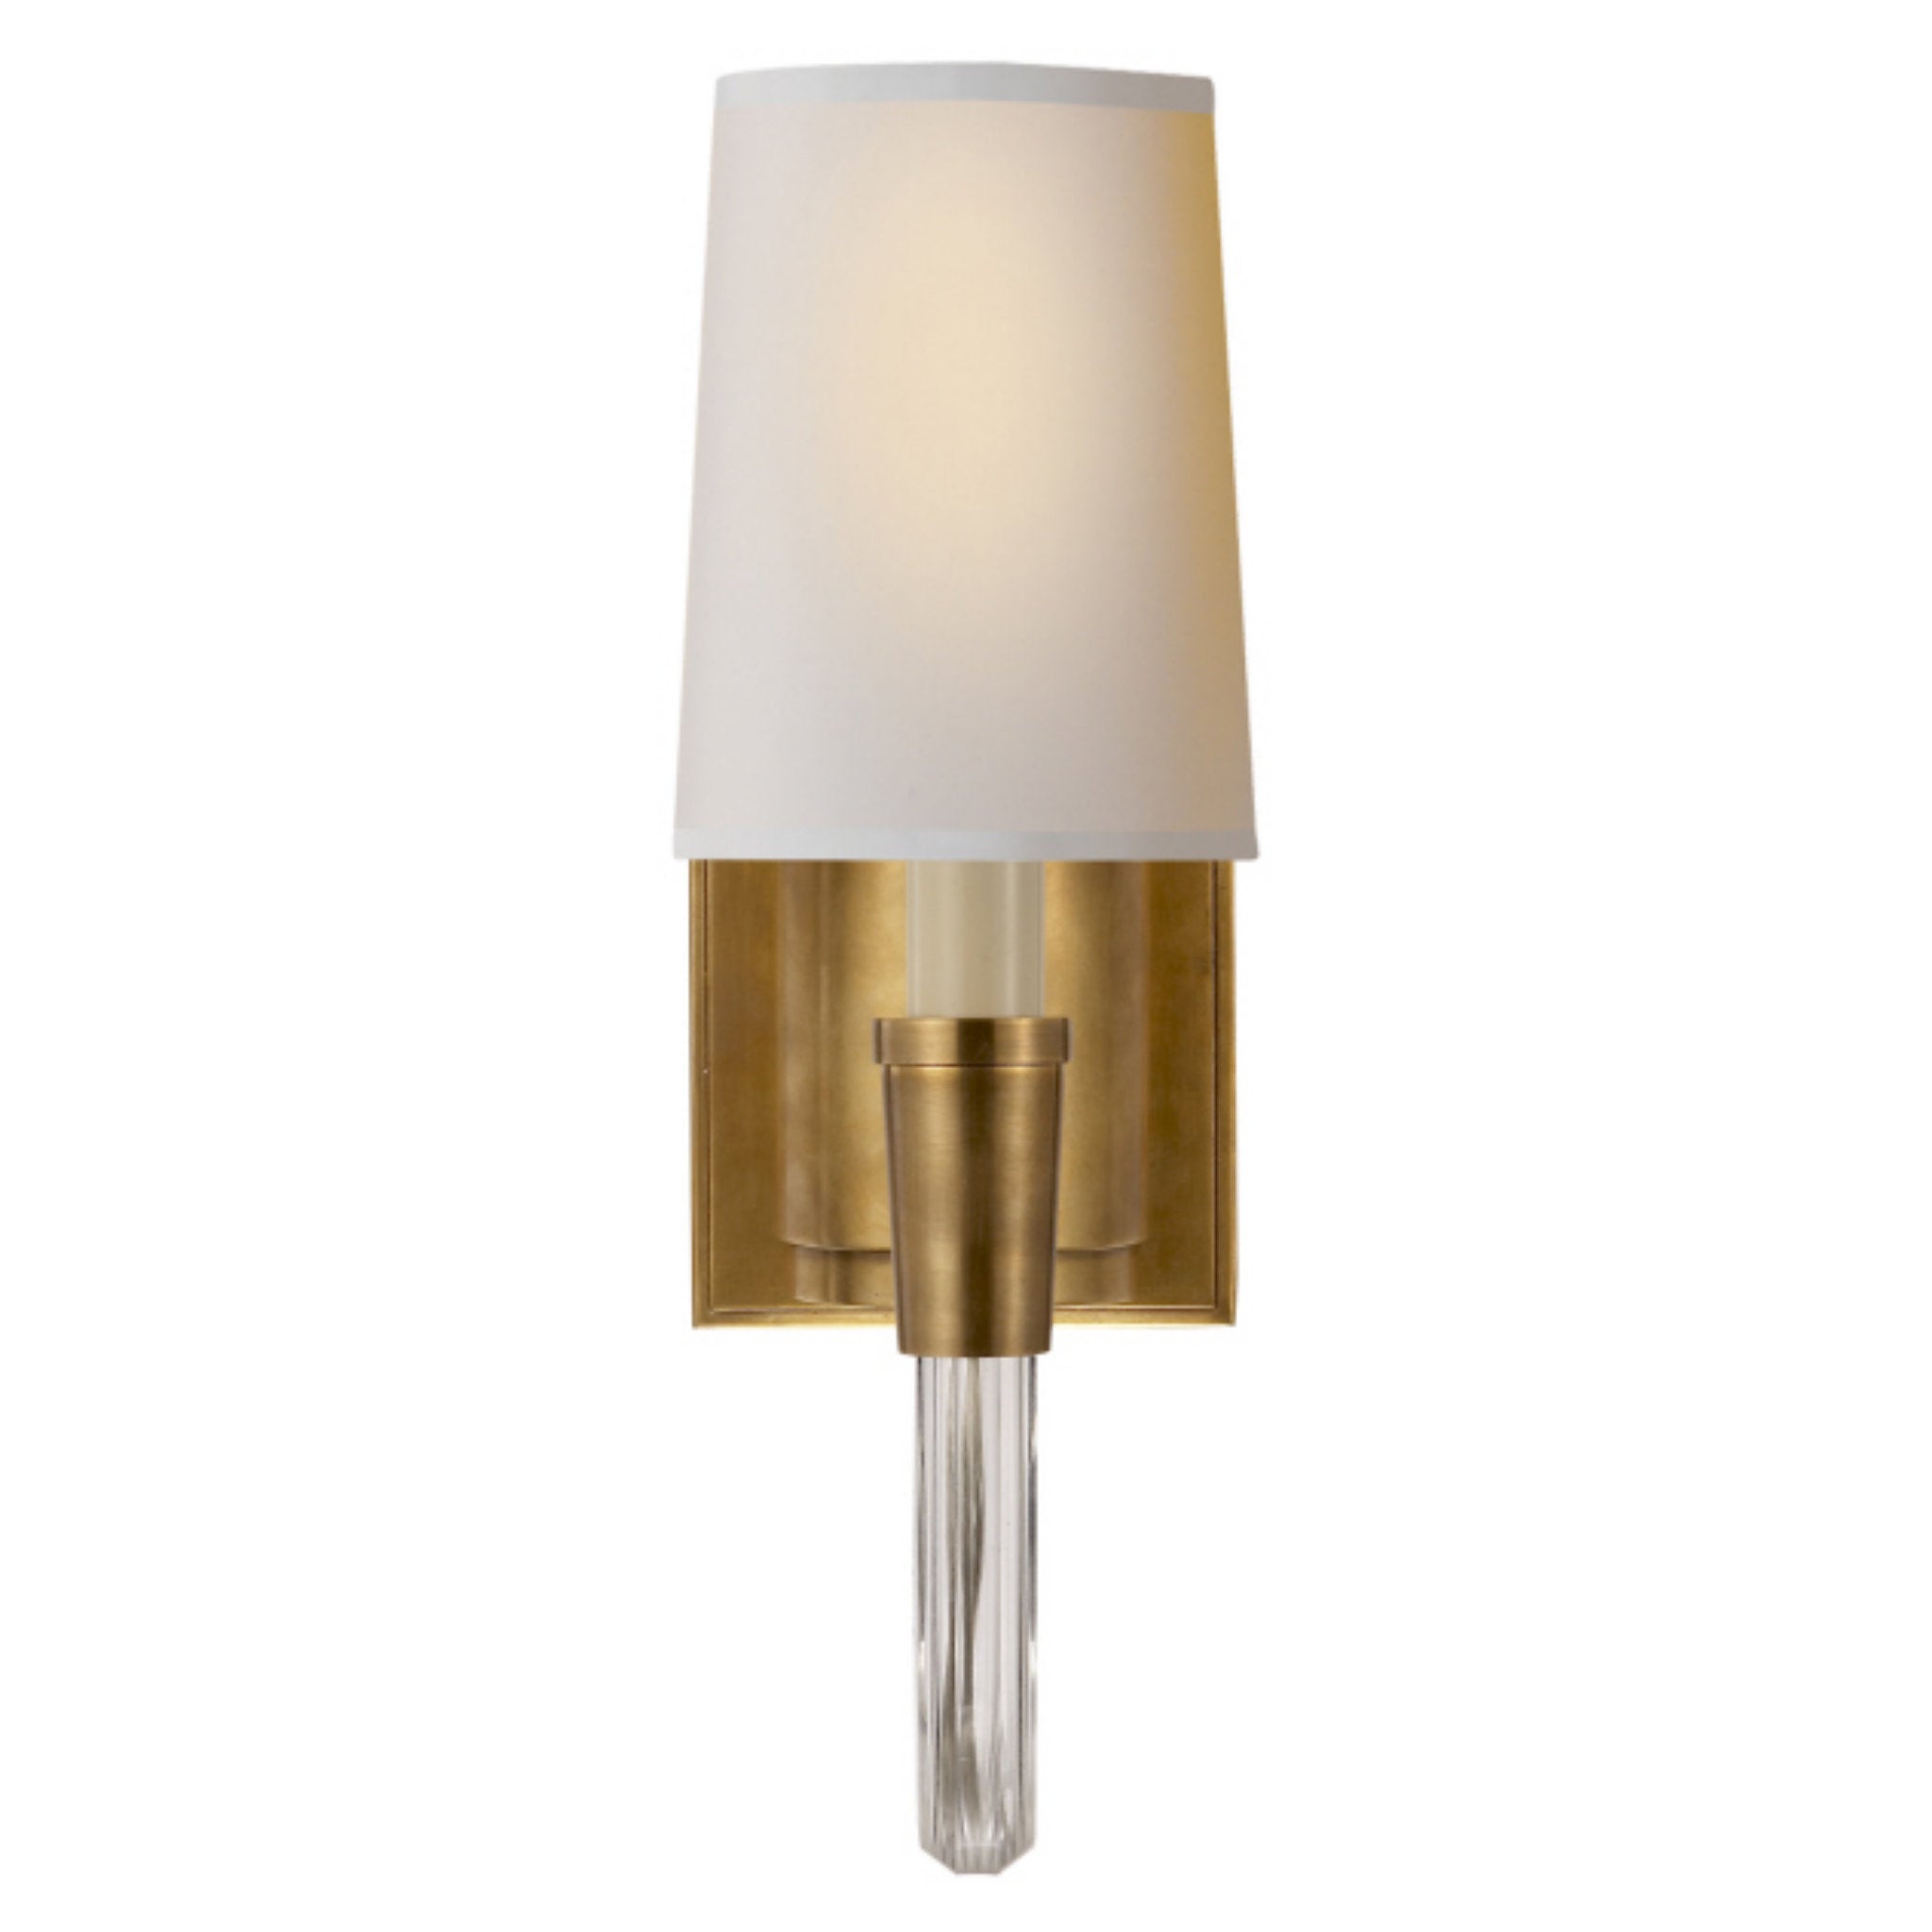 Thomas O'Brien Vivian Single Sconce in Hand-Rubbed Antique Brass with Natural Paper Shade